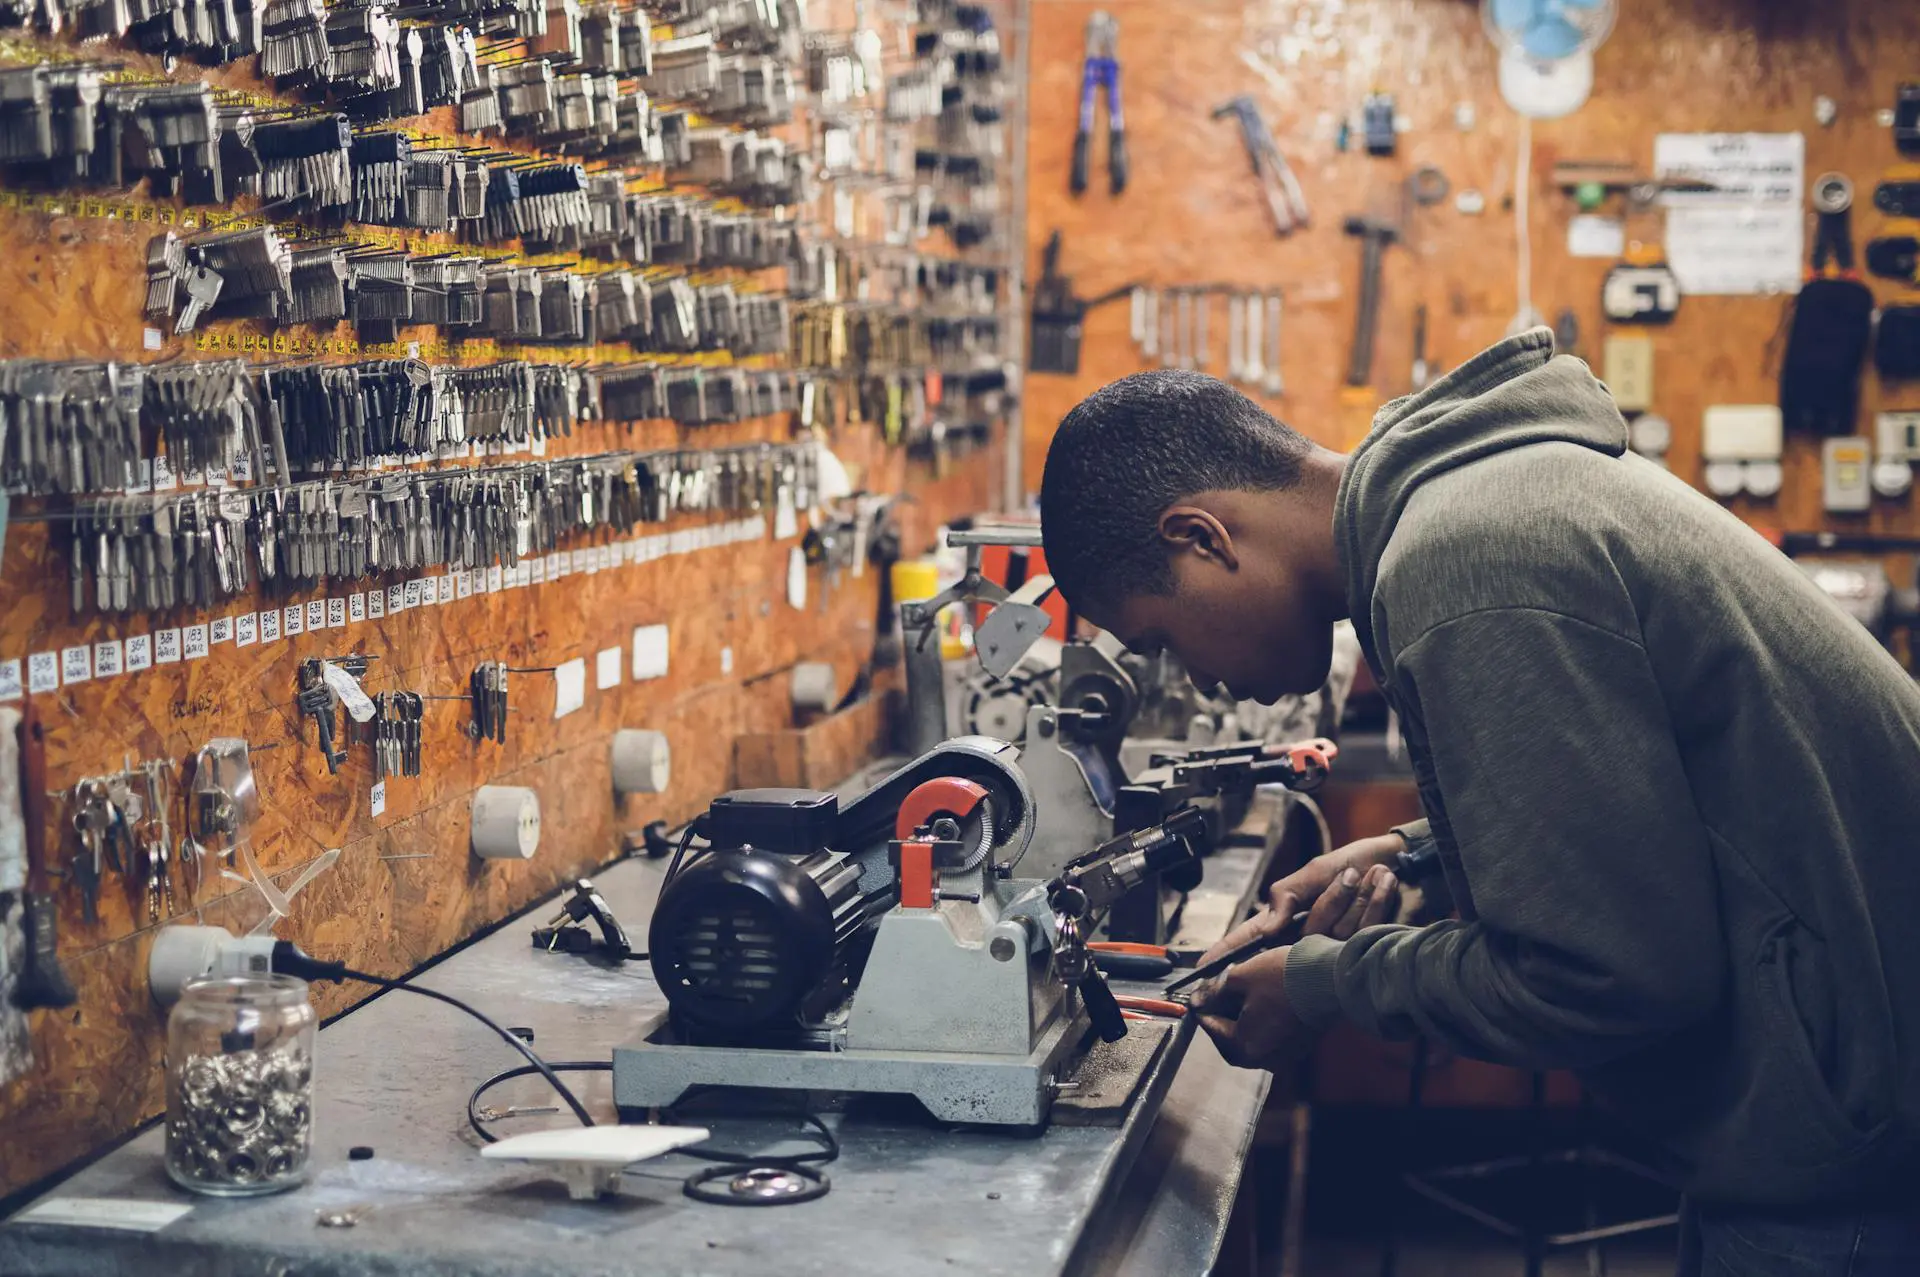 A teenager works on machine in a skilled trade workshop with a wall of keys